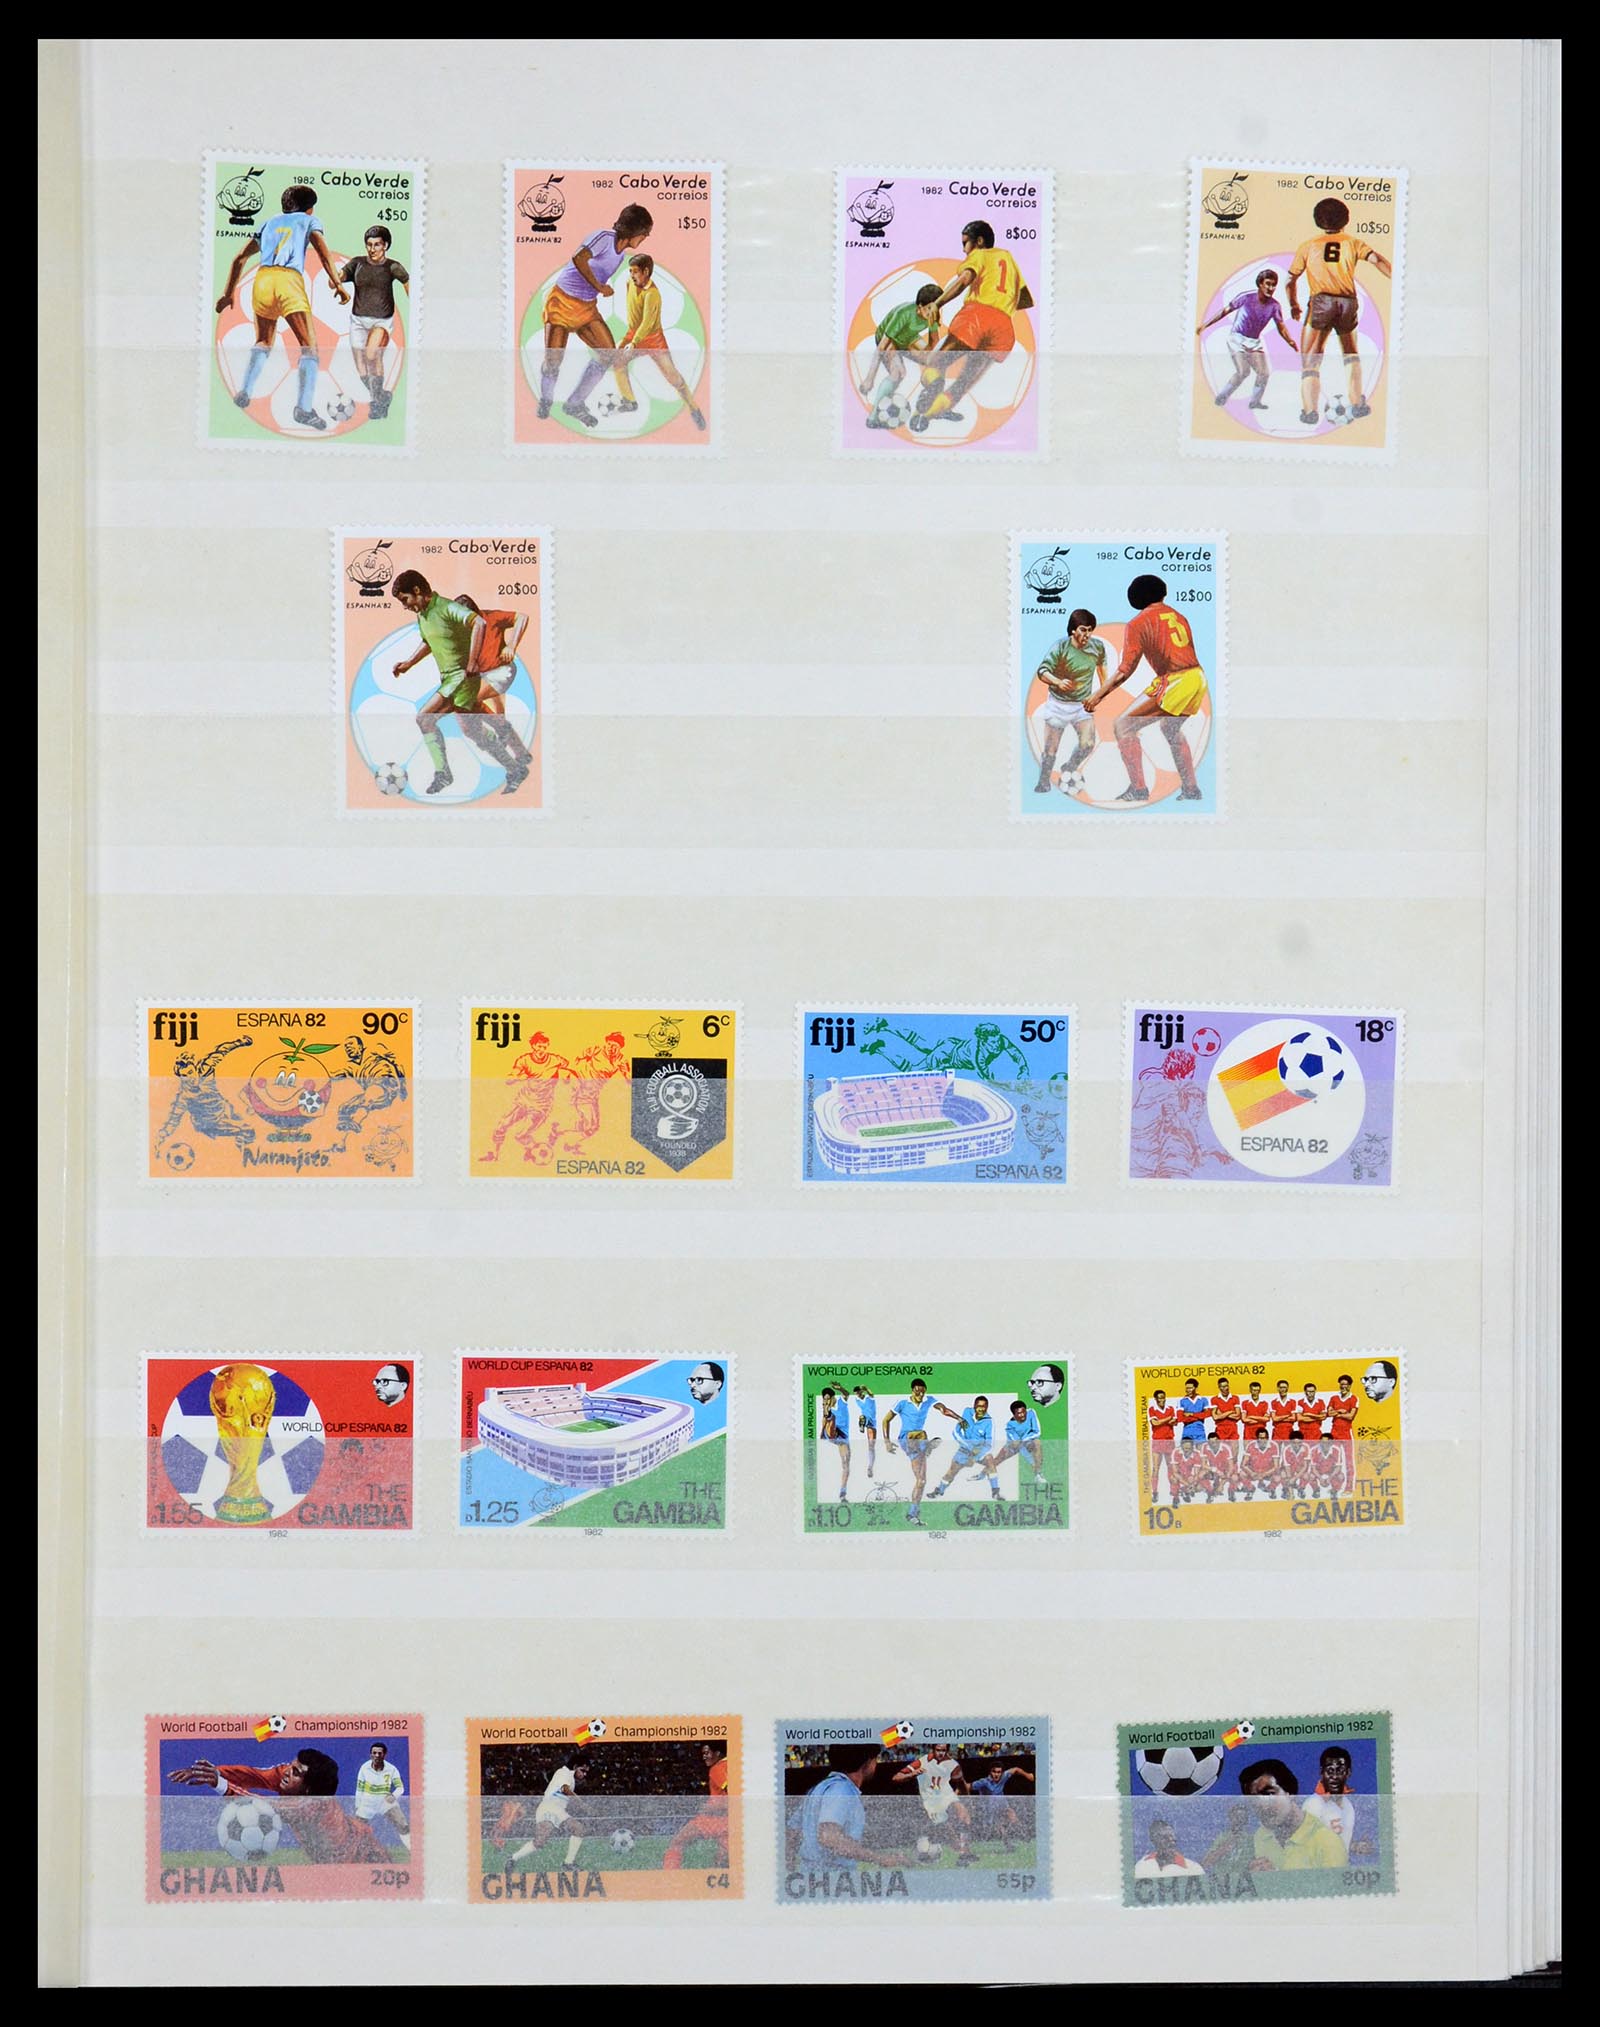 35878 001 - Stamp Collection 35878 1982 and 1986 FIFA World Cup.